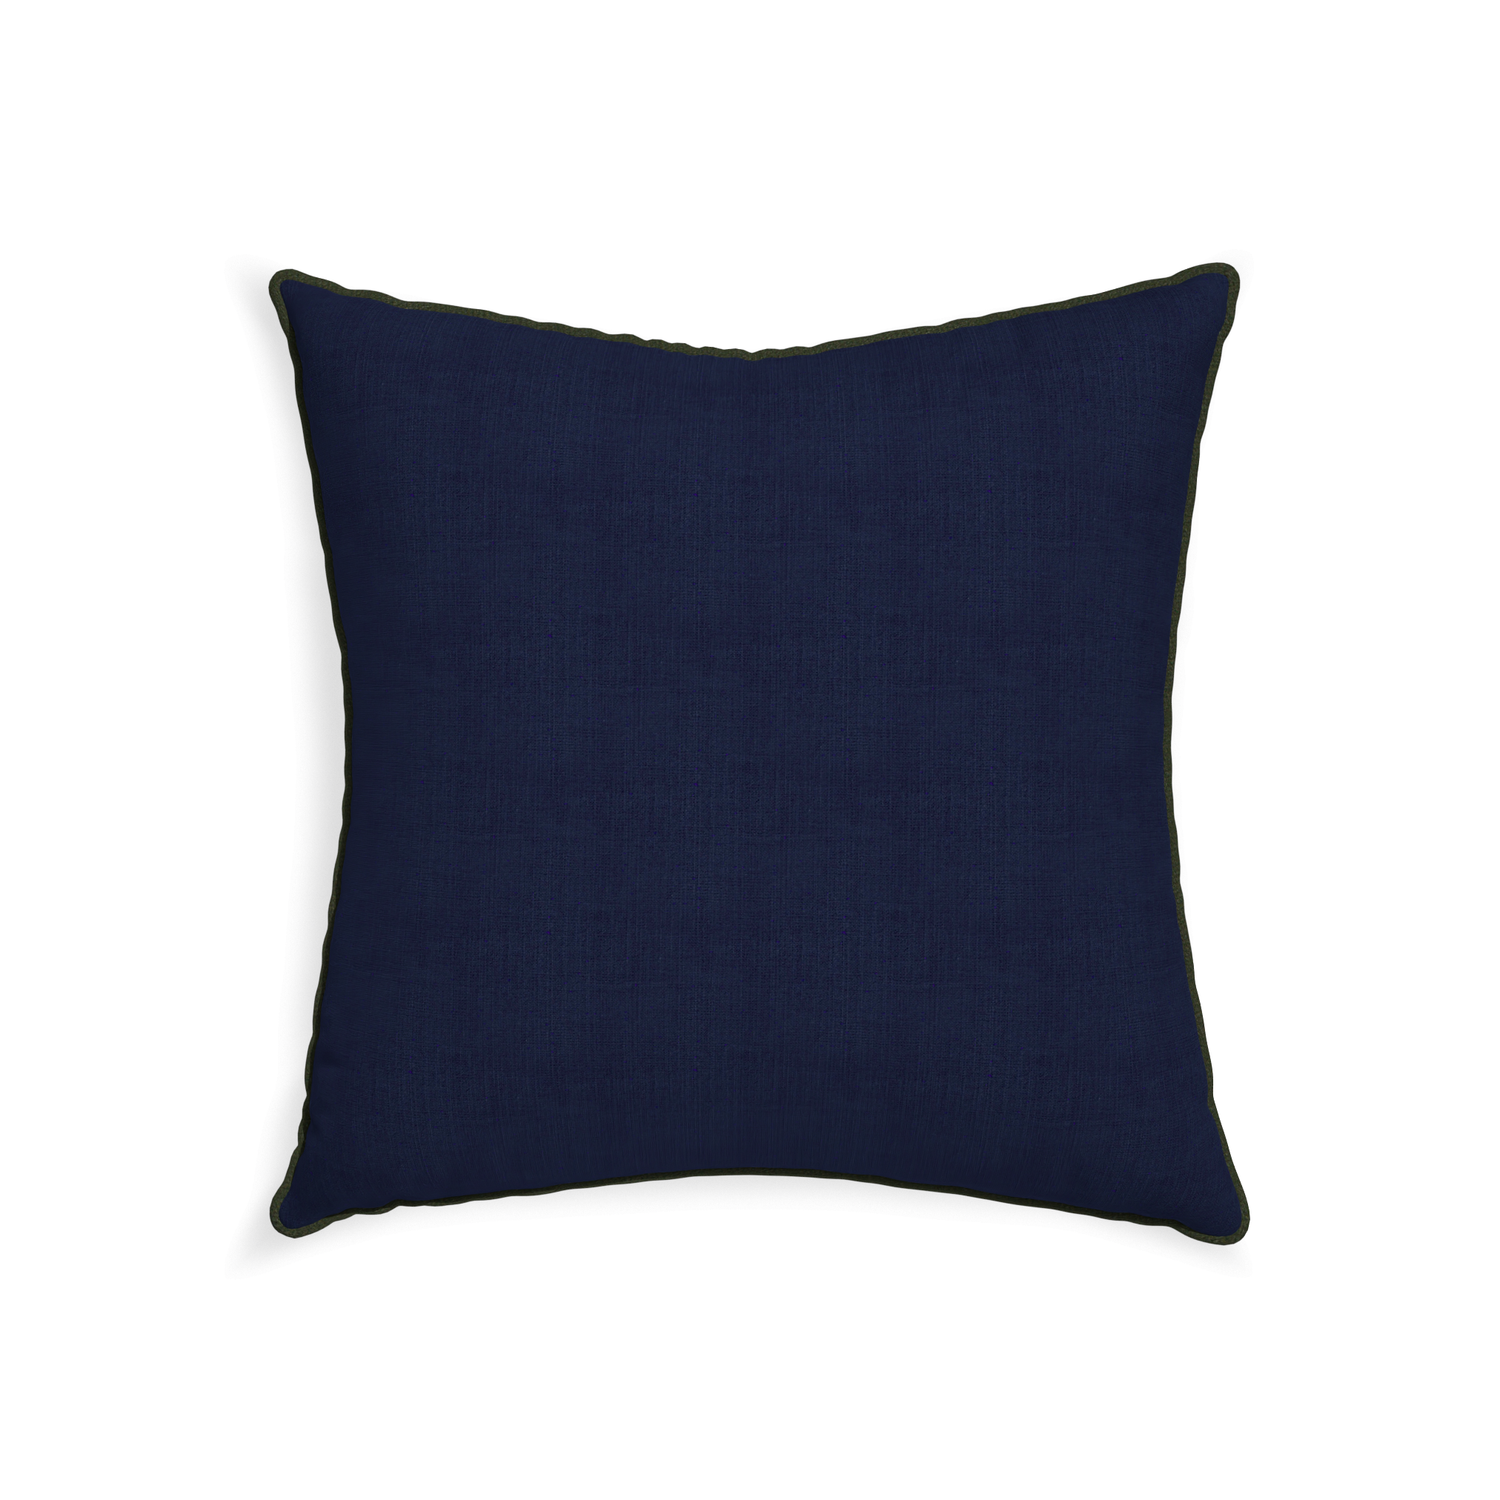 22-square midnight custom navy bluepillow with f piping on white background